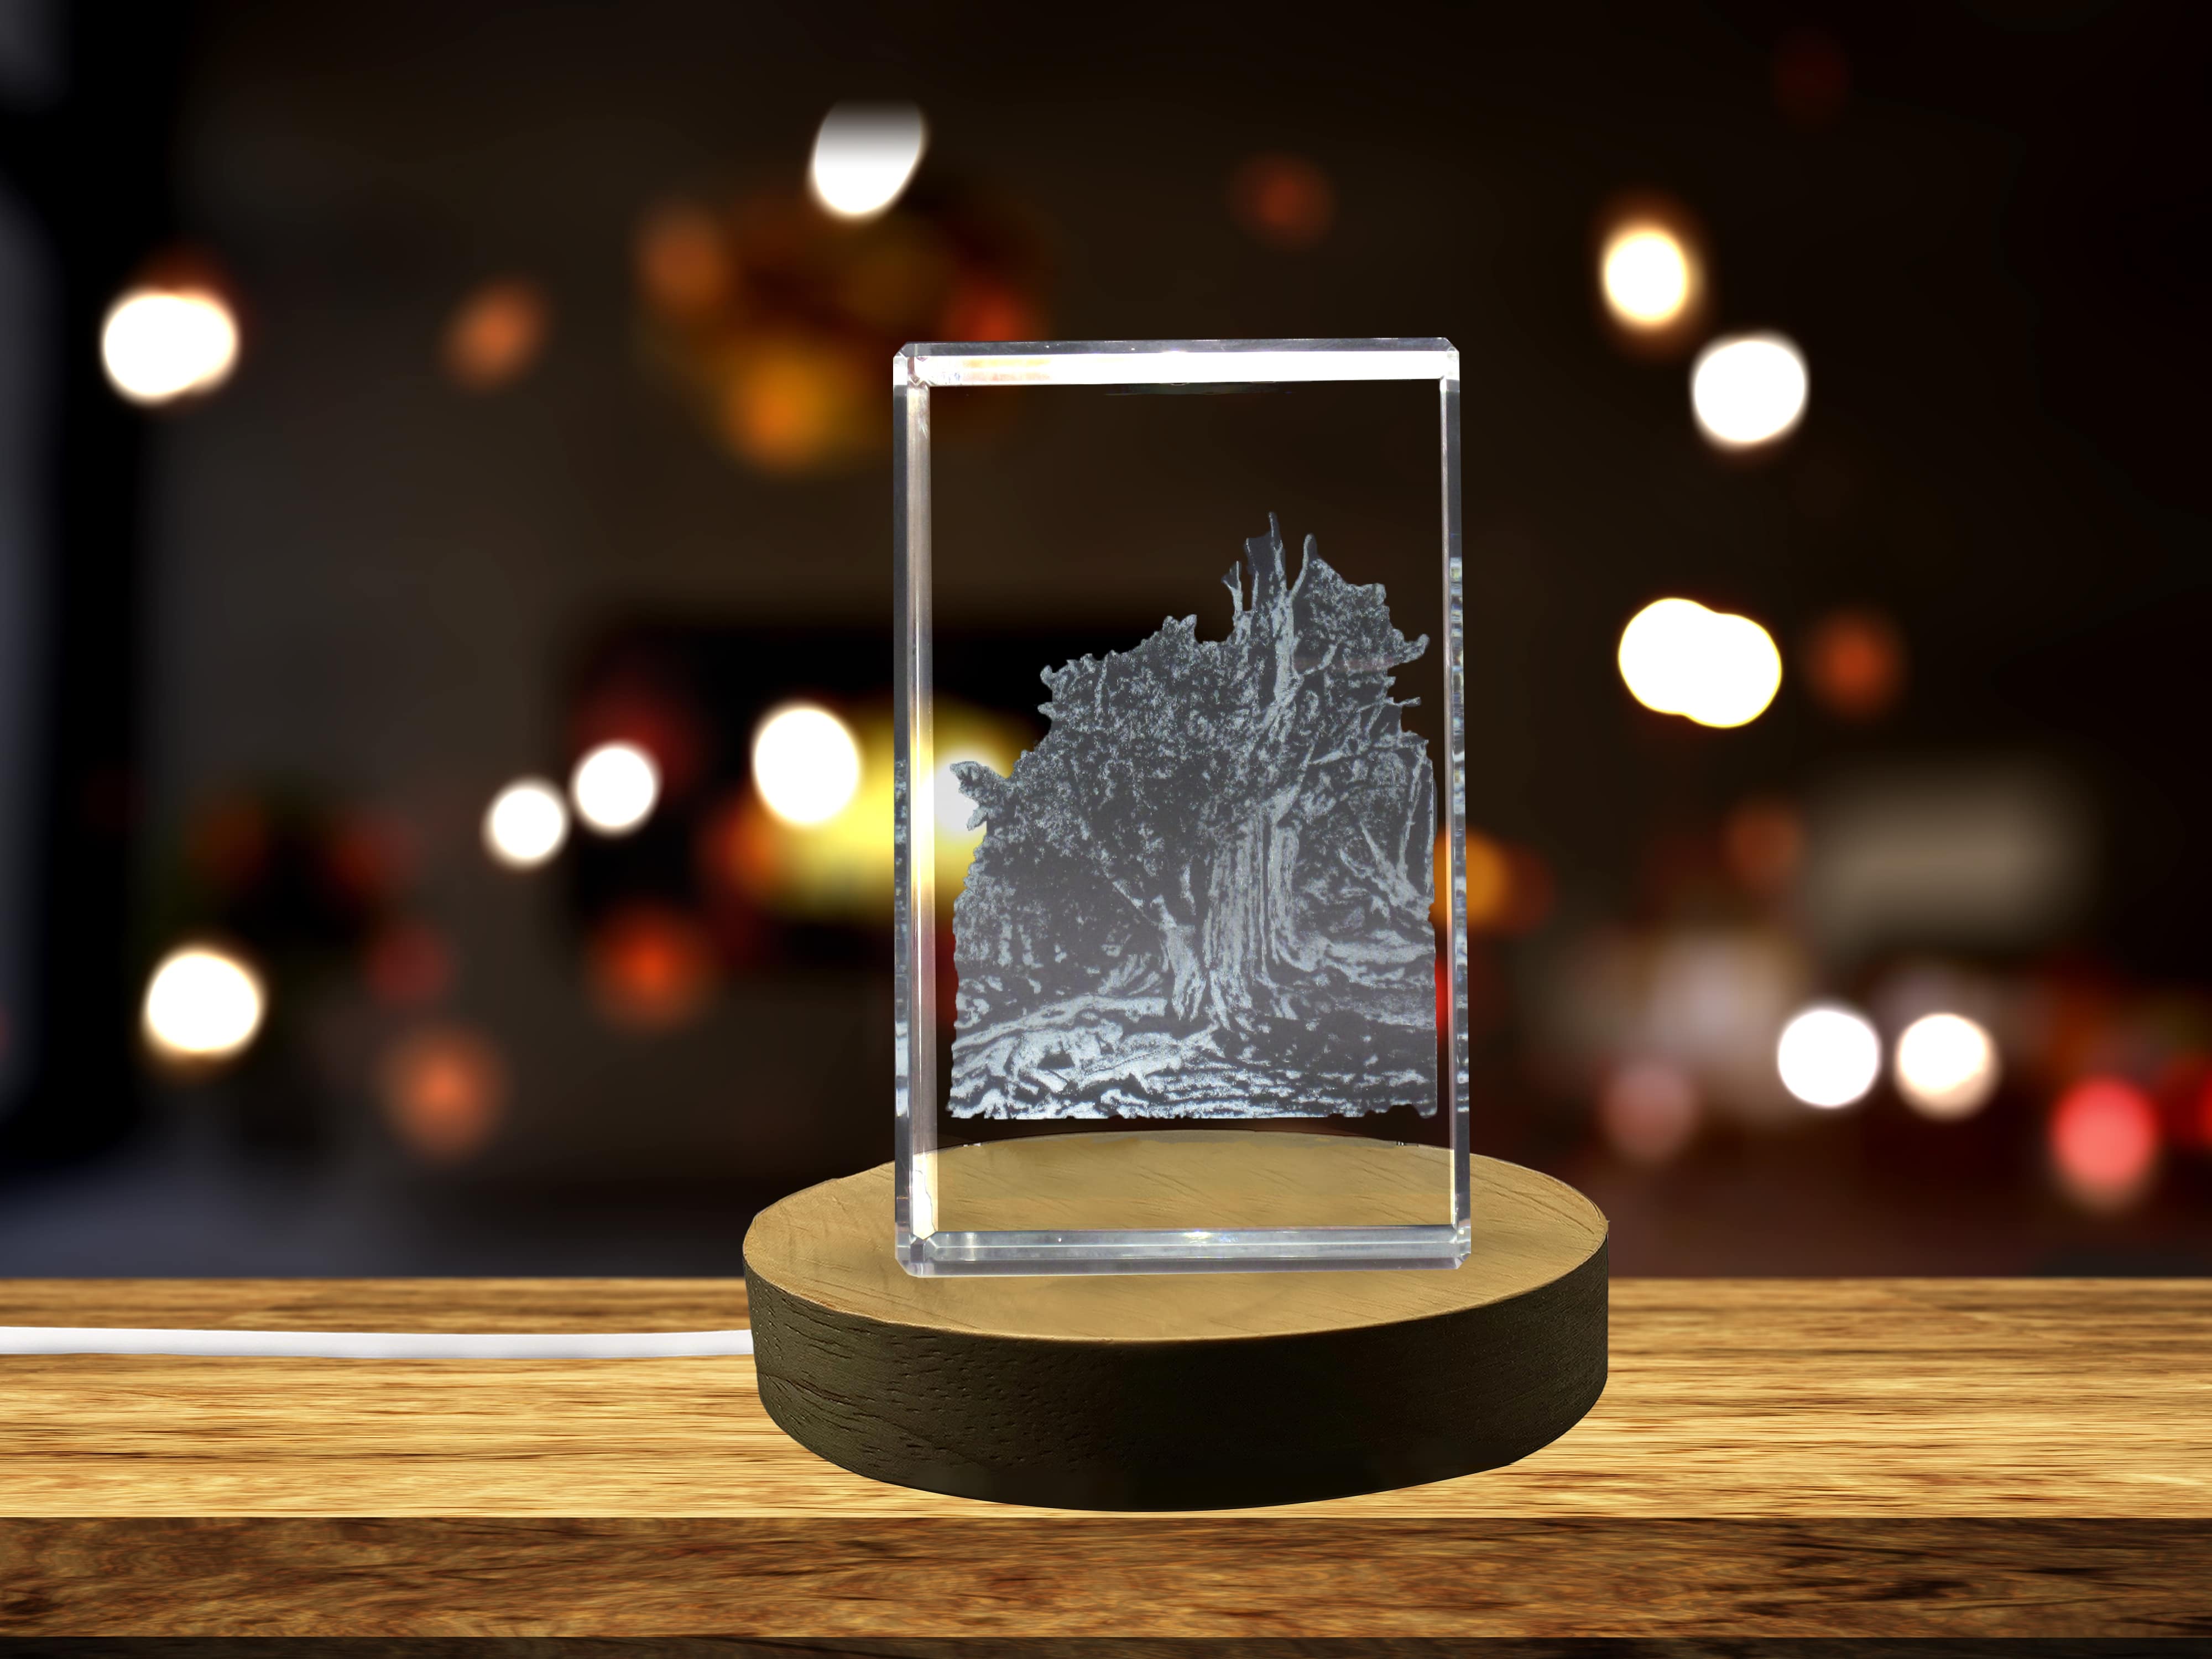 Great Basin Bristlecone Pine 3D Engraved Crystal 3D Engraved Crystal Keepsake/Gift/Decor/Collectible/Souvenir A&B Crystal Collection